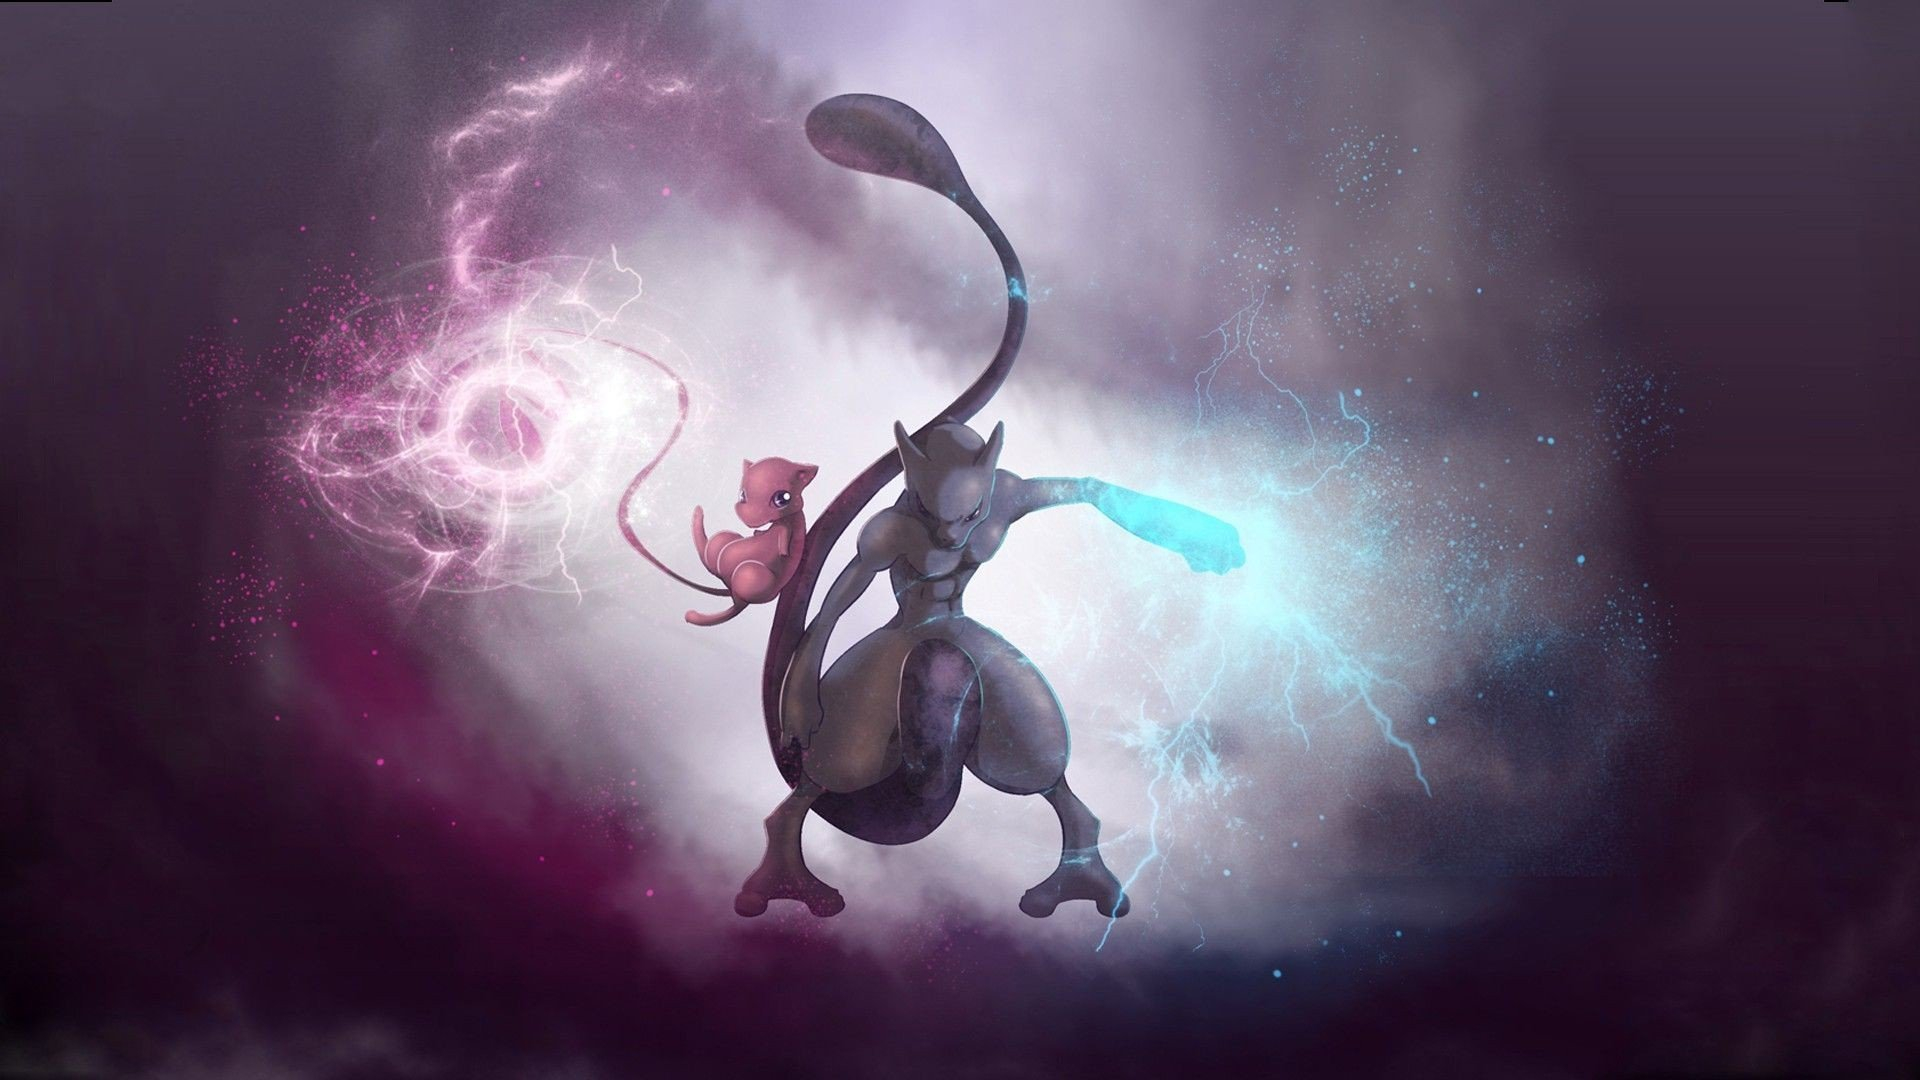 1920x1080 Pokemon, Mew, Mewtwo HD Wallpapers / Desktop and Mobile Images \u0026 Photos